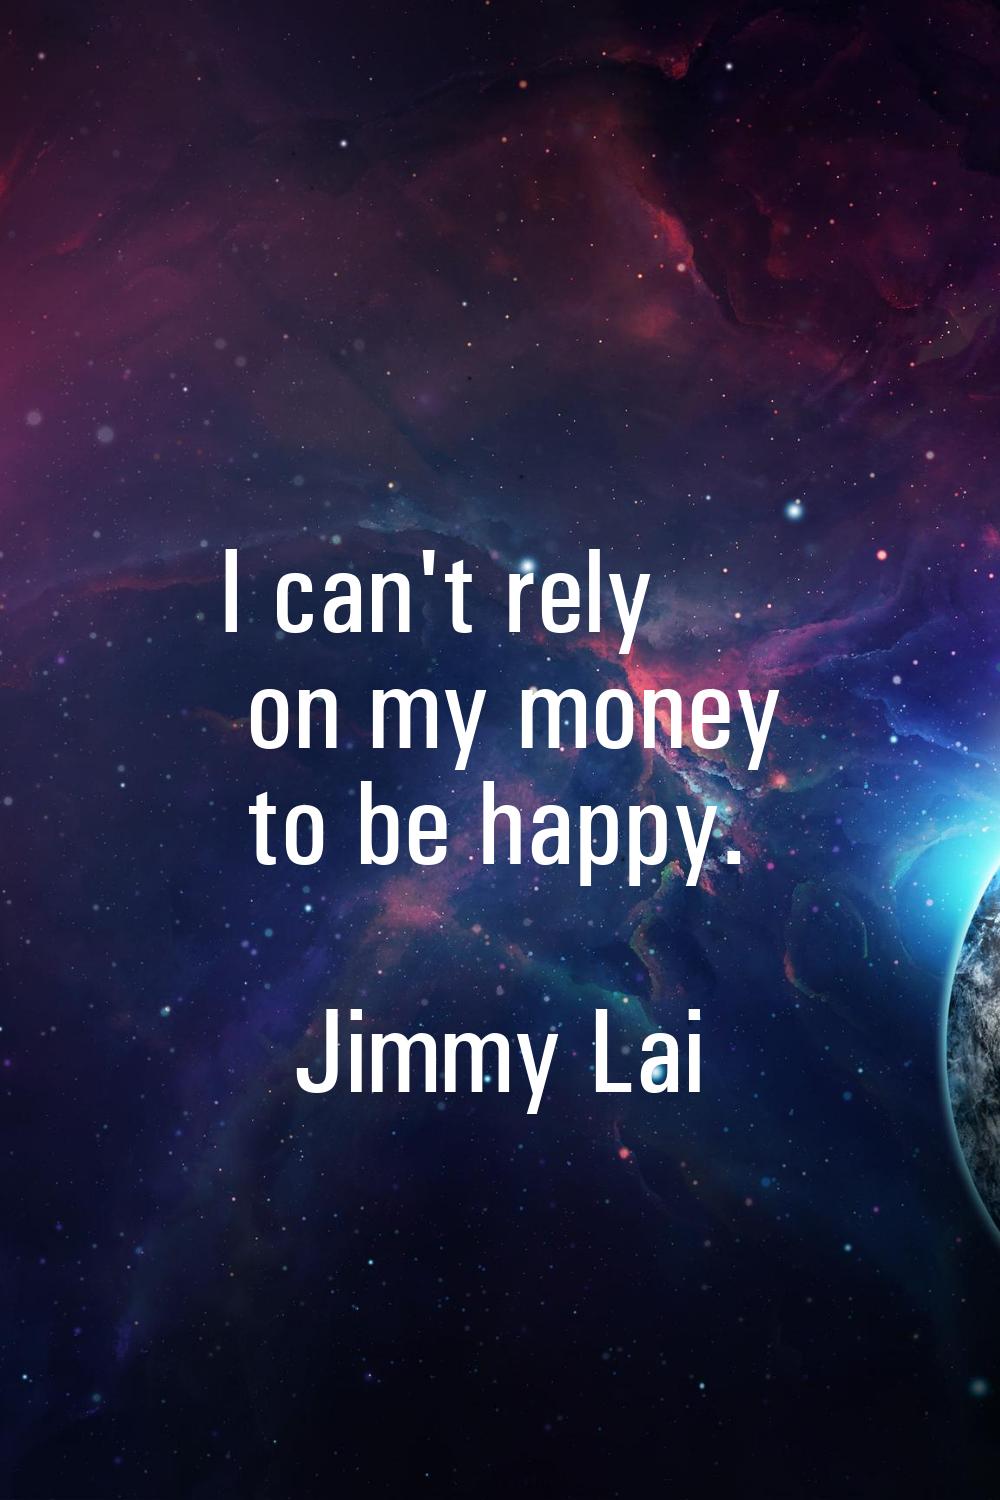 I can't rely on my money to be happy.